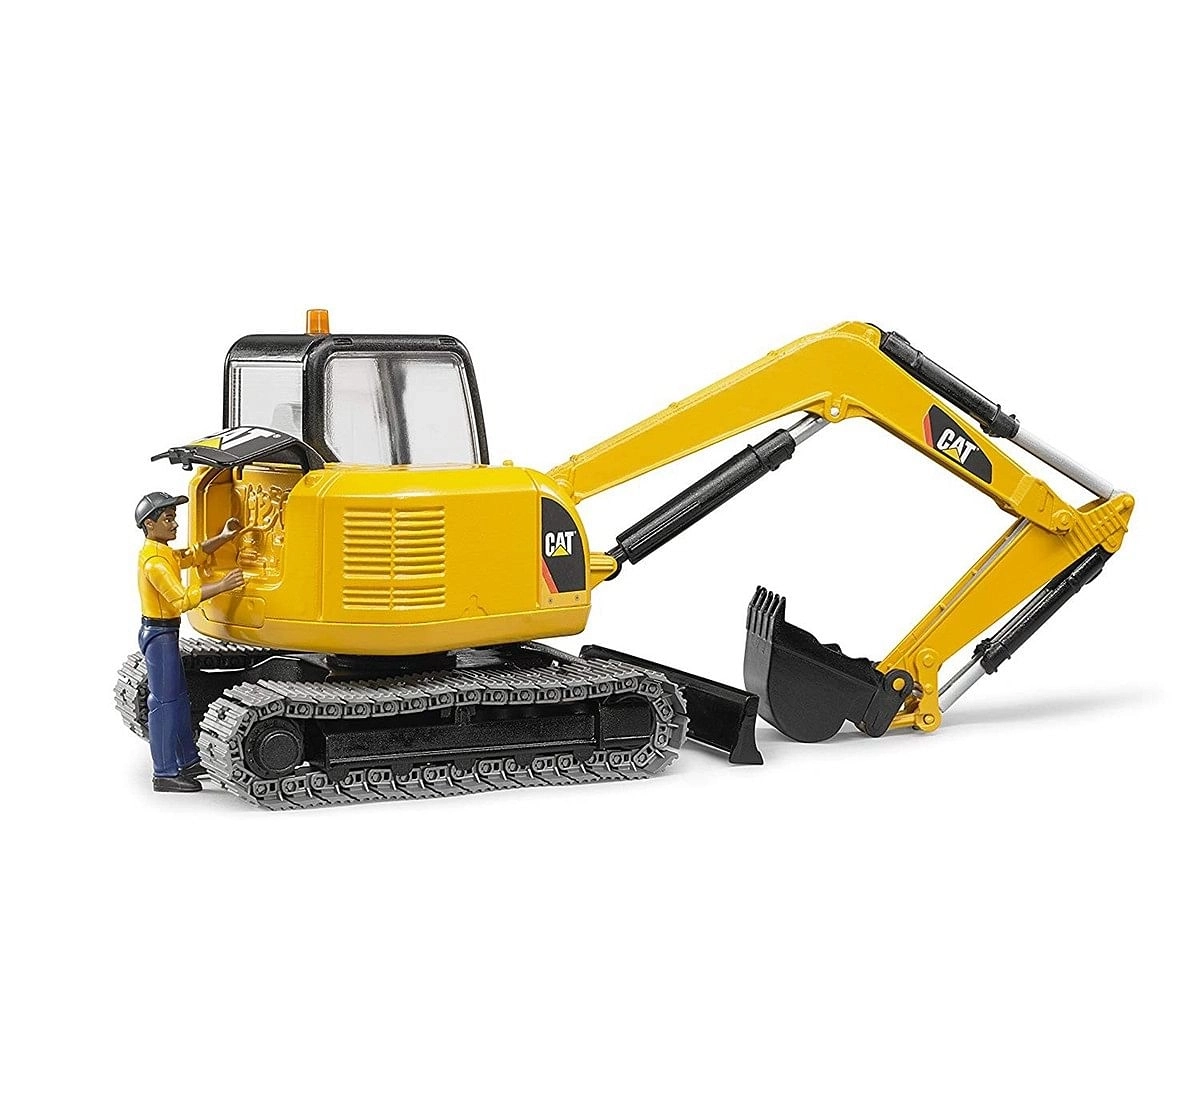 CAT Bruder 1:16 Caterpillar Mini Excavator with Worker Vehicles for Kids age 3Y+ (Yellow)